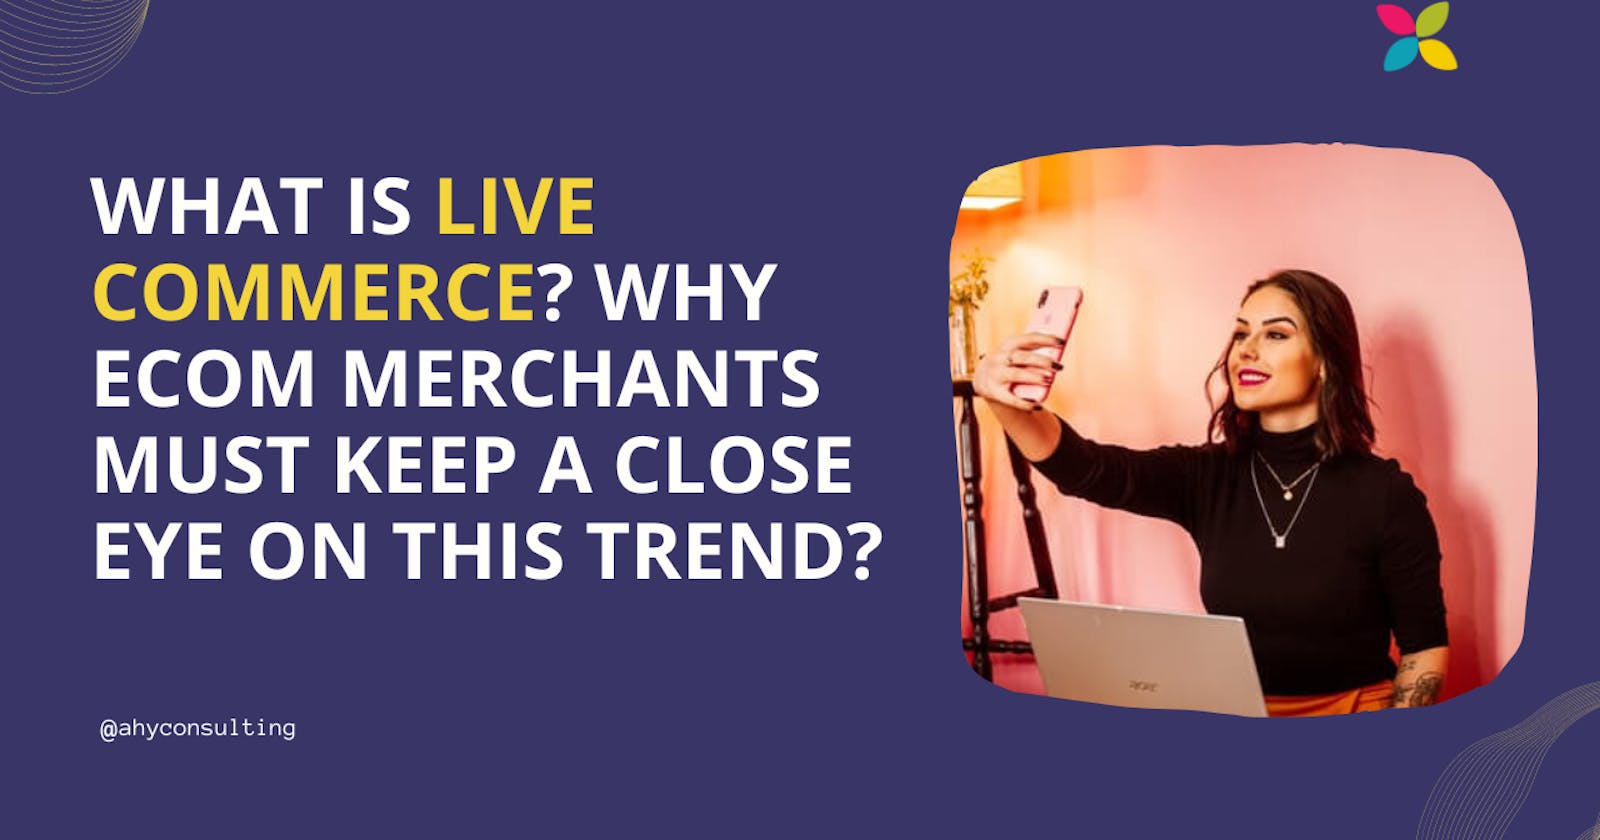 What is Live Commerce and Why eCommerce merchants should keep a close eye on this trend?